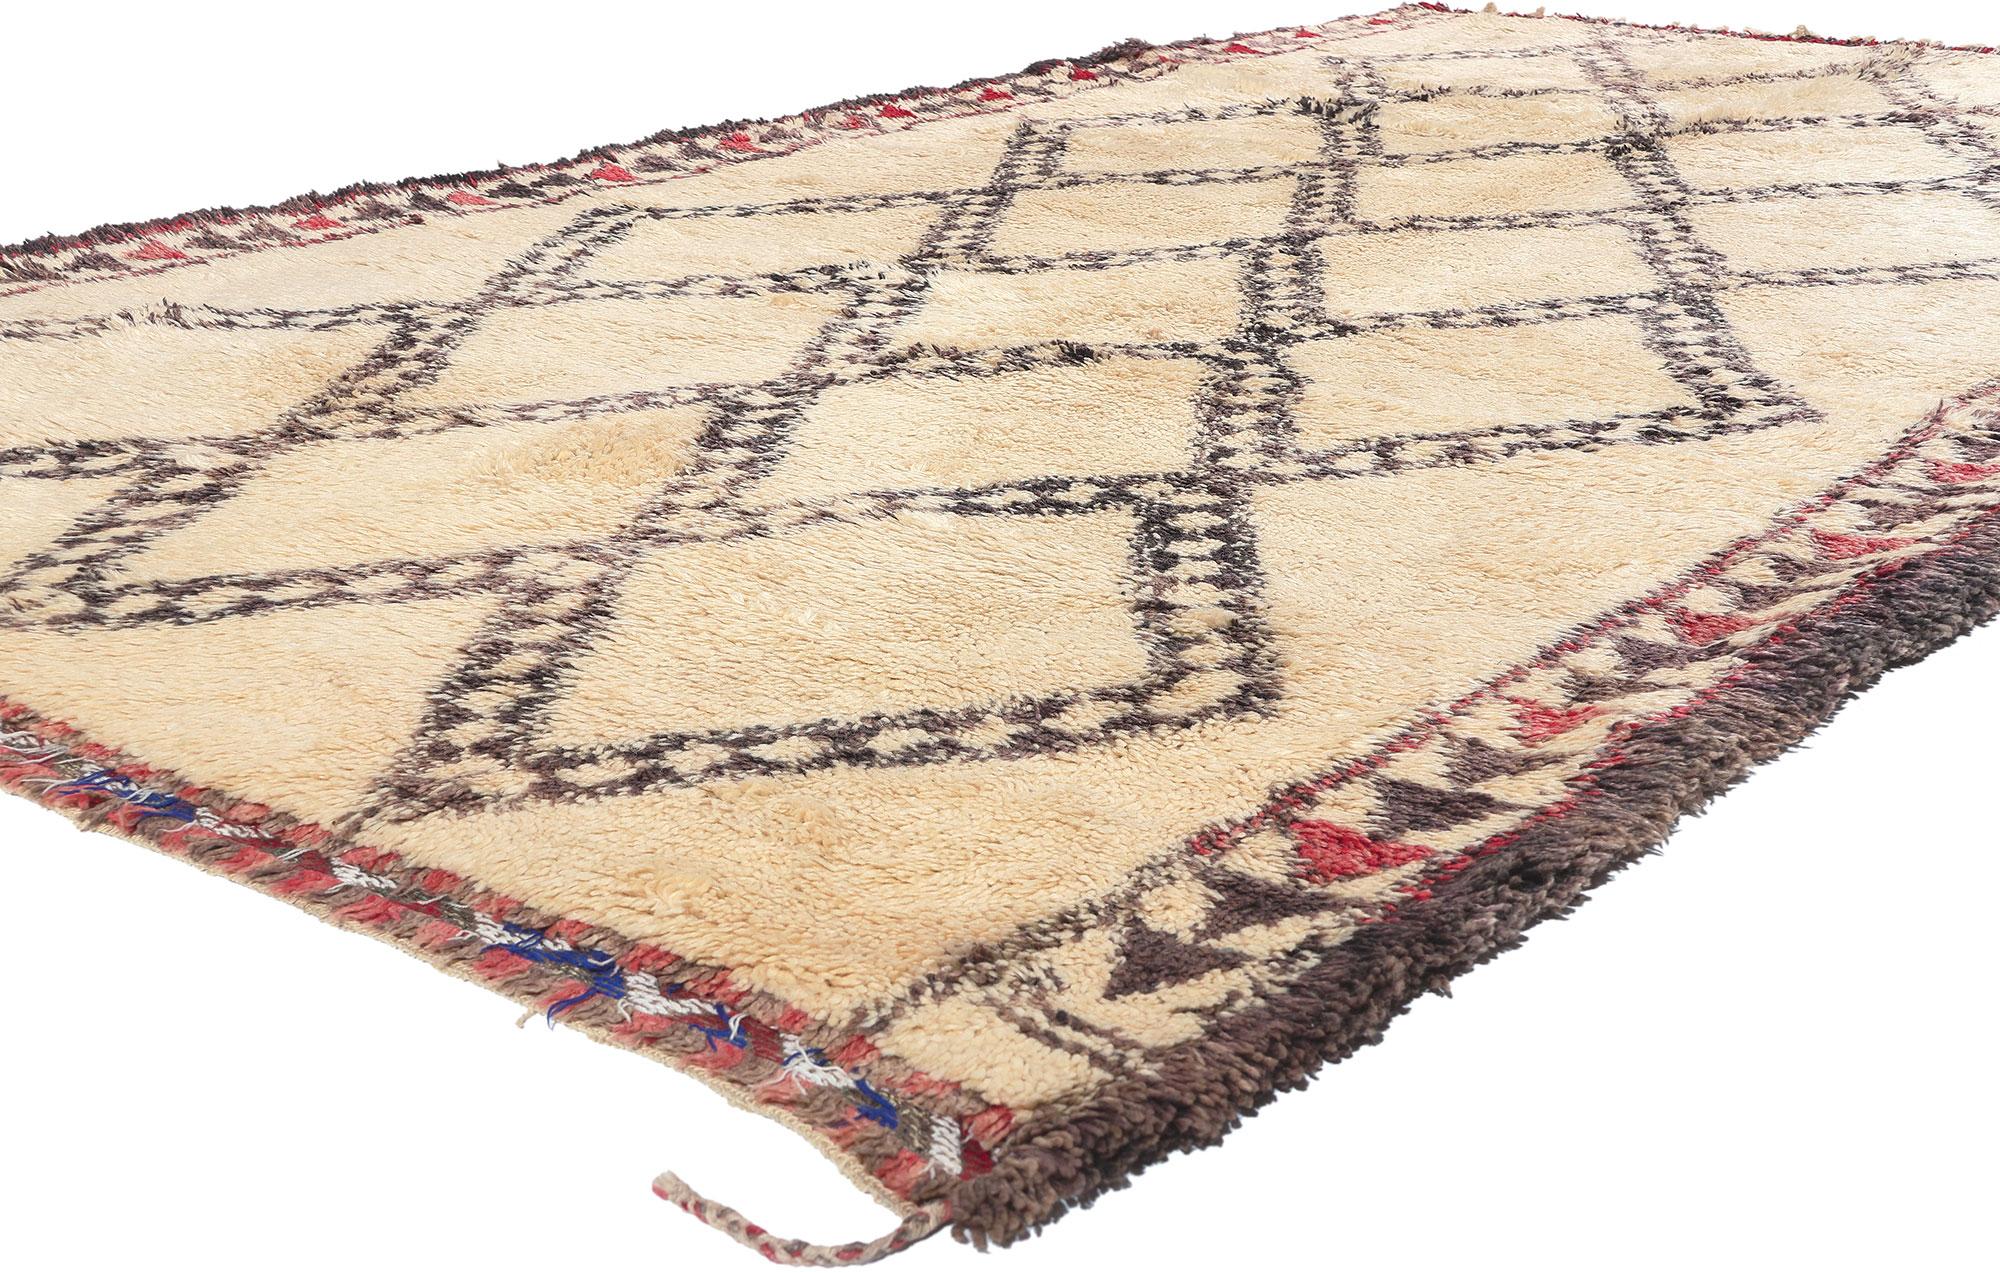 20771 Vintage Moroccan Beni Ourain Rug, 06'03 x 11'00. Embrace the essence of Midcentury Modern allure with this hand knotted wool vintage Moroccan Beni Ourain rug. A harmonious fusion of cozy nomad aesthetics and well-balanced symmetry unfolds,